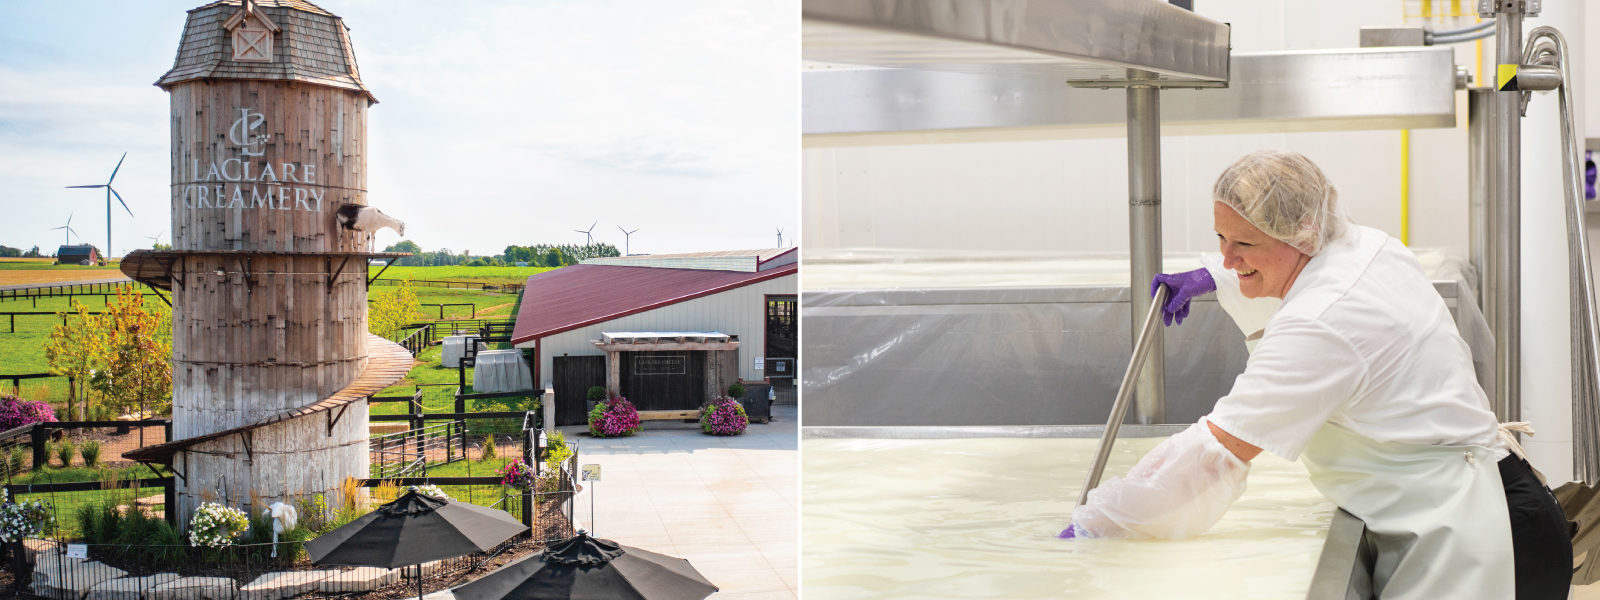 A diptych of a person working with cheese and a silo that reads "LaClare Creamery" on the side